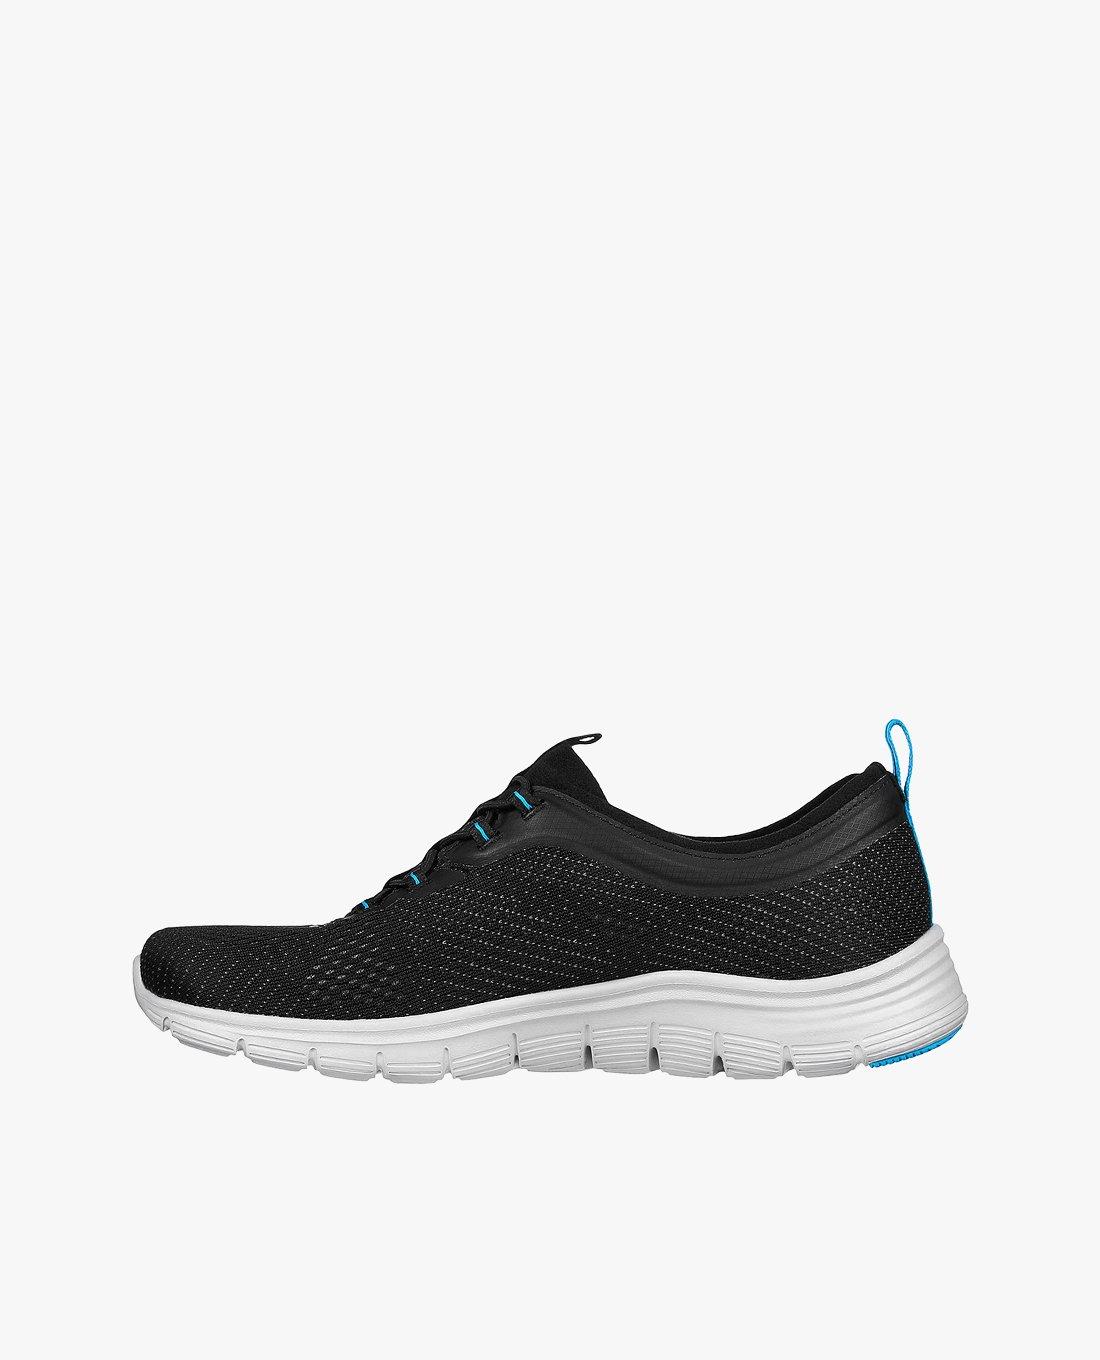 SKECHERS - Giày thể thao nữ Arch Fit Vista 104370